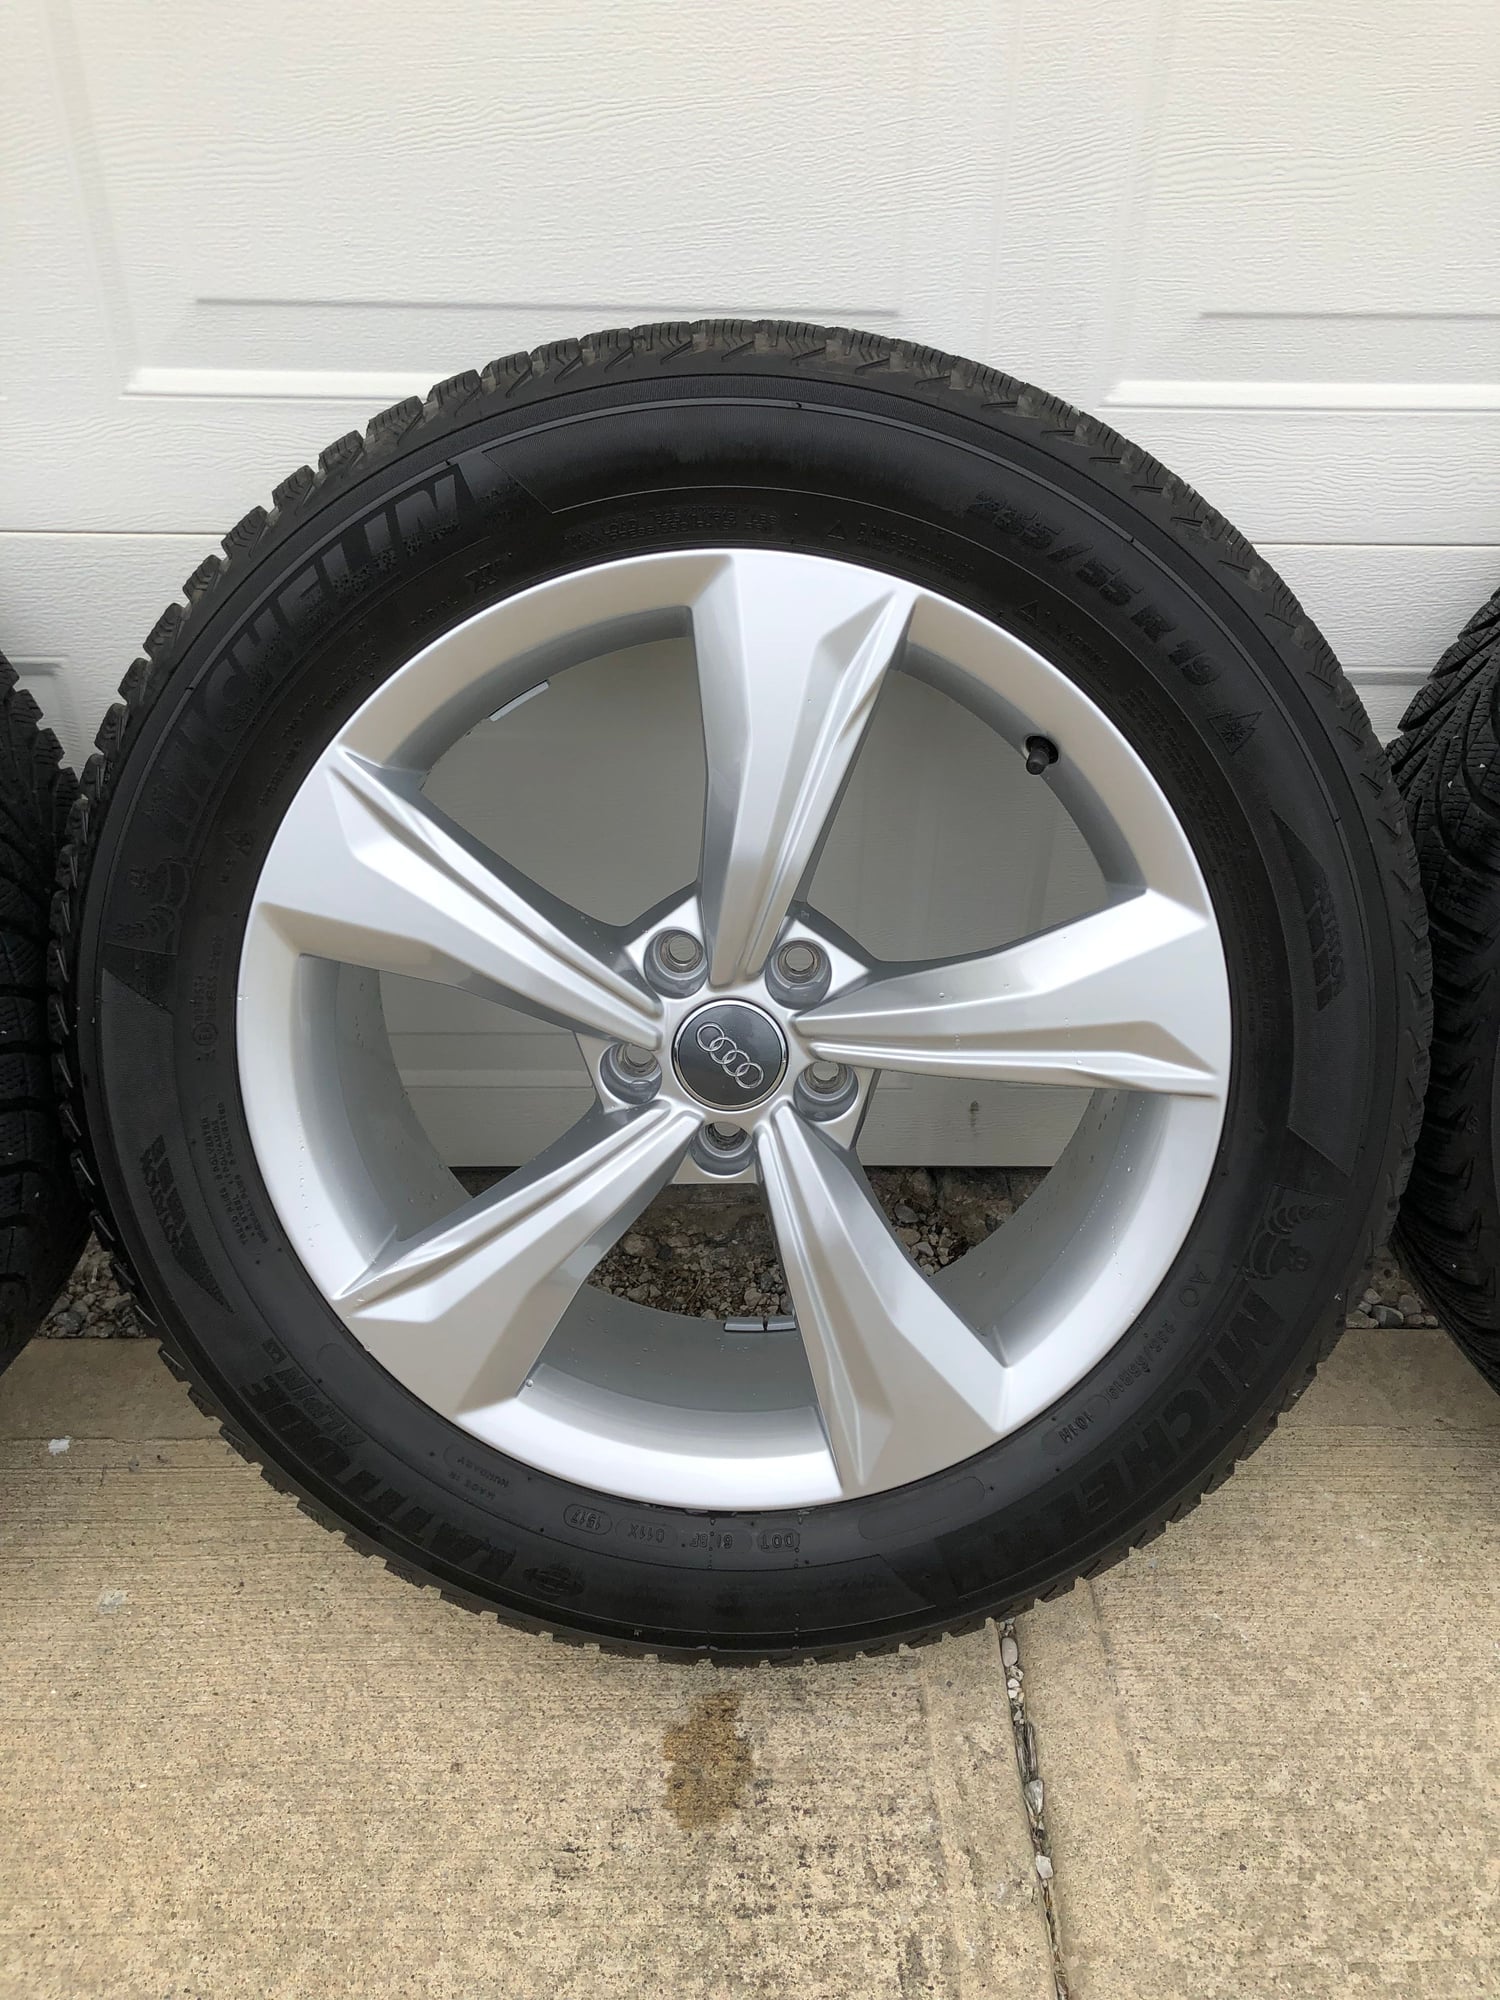 Wheels and Tires/Axles - Audi Q5 SQ5 OEM 19 Inch Winter Tire Wheel Package NPN071070 235/55/19 7J - Used - 2017 to 2021 Audi Q5 - 2017 to 2021 Audi SQ5 - Carmel, IN 46074, United States